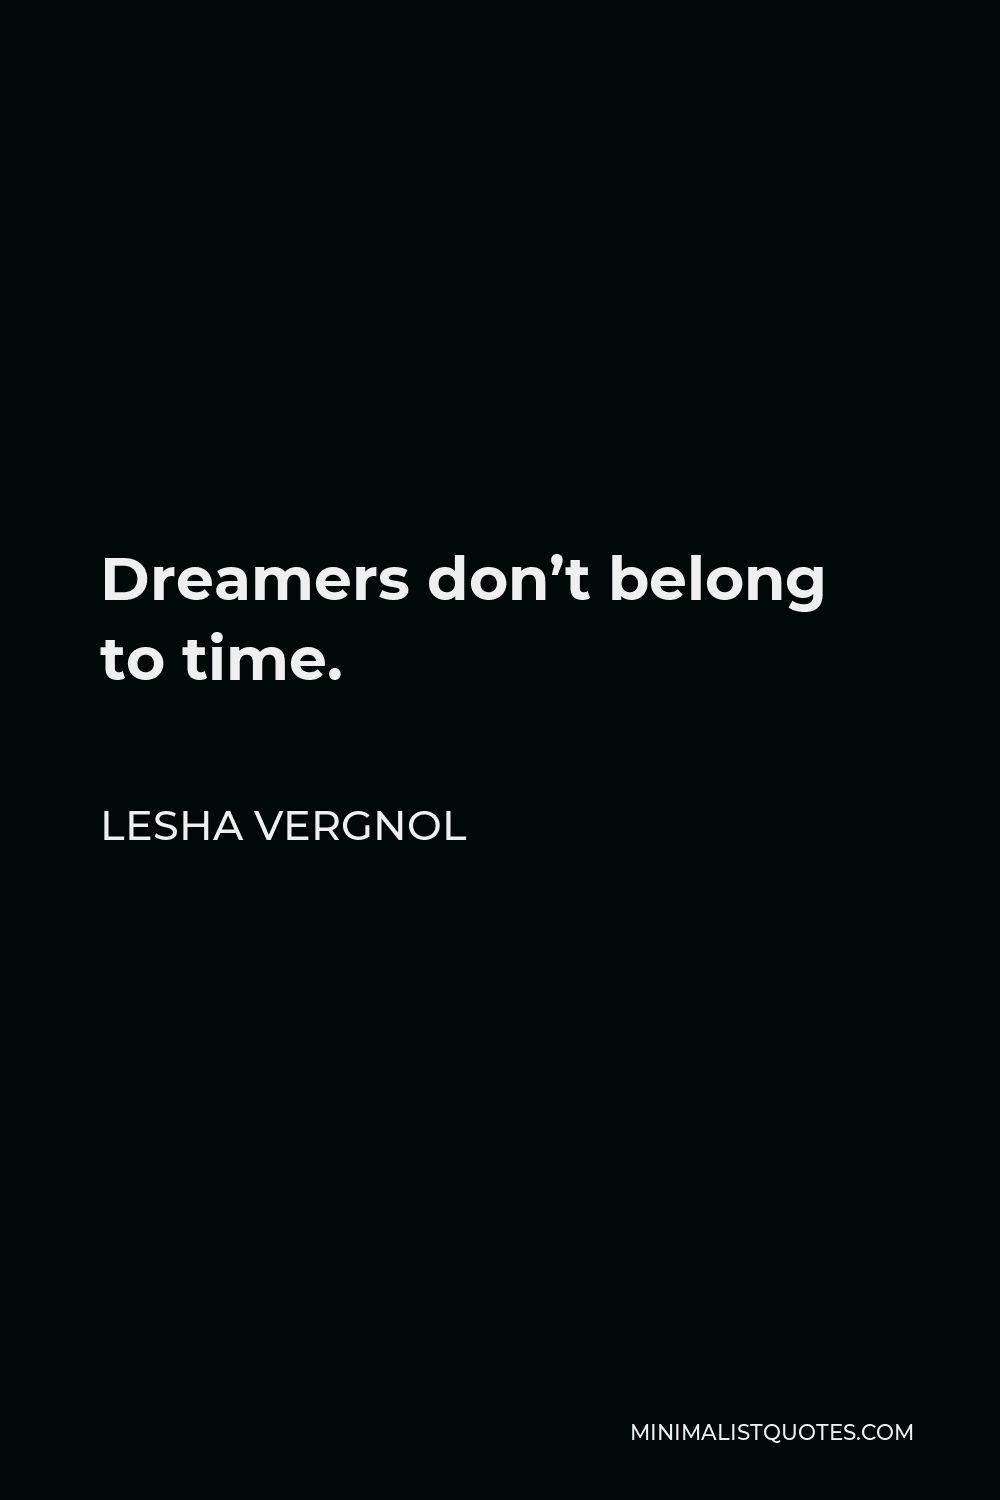 Lesha Vergnol Quote - Dreamers don’t belong to time.